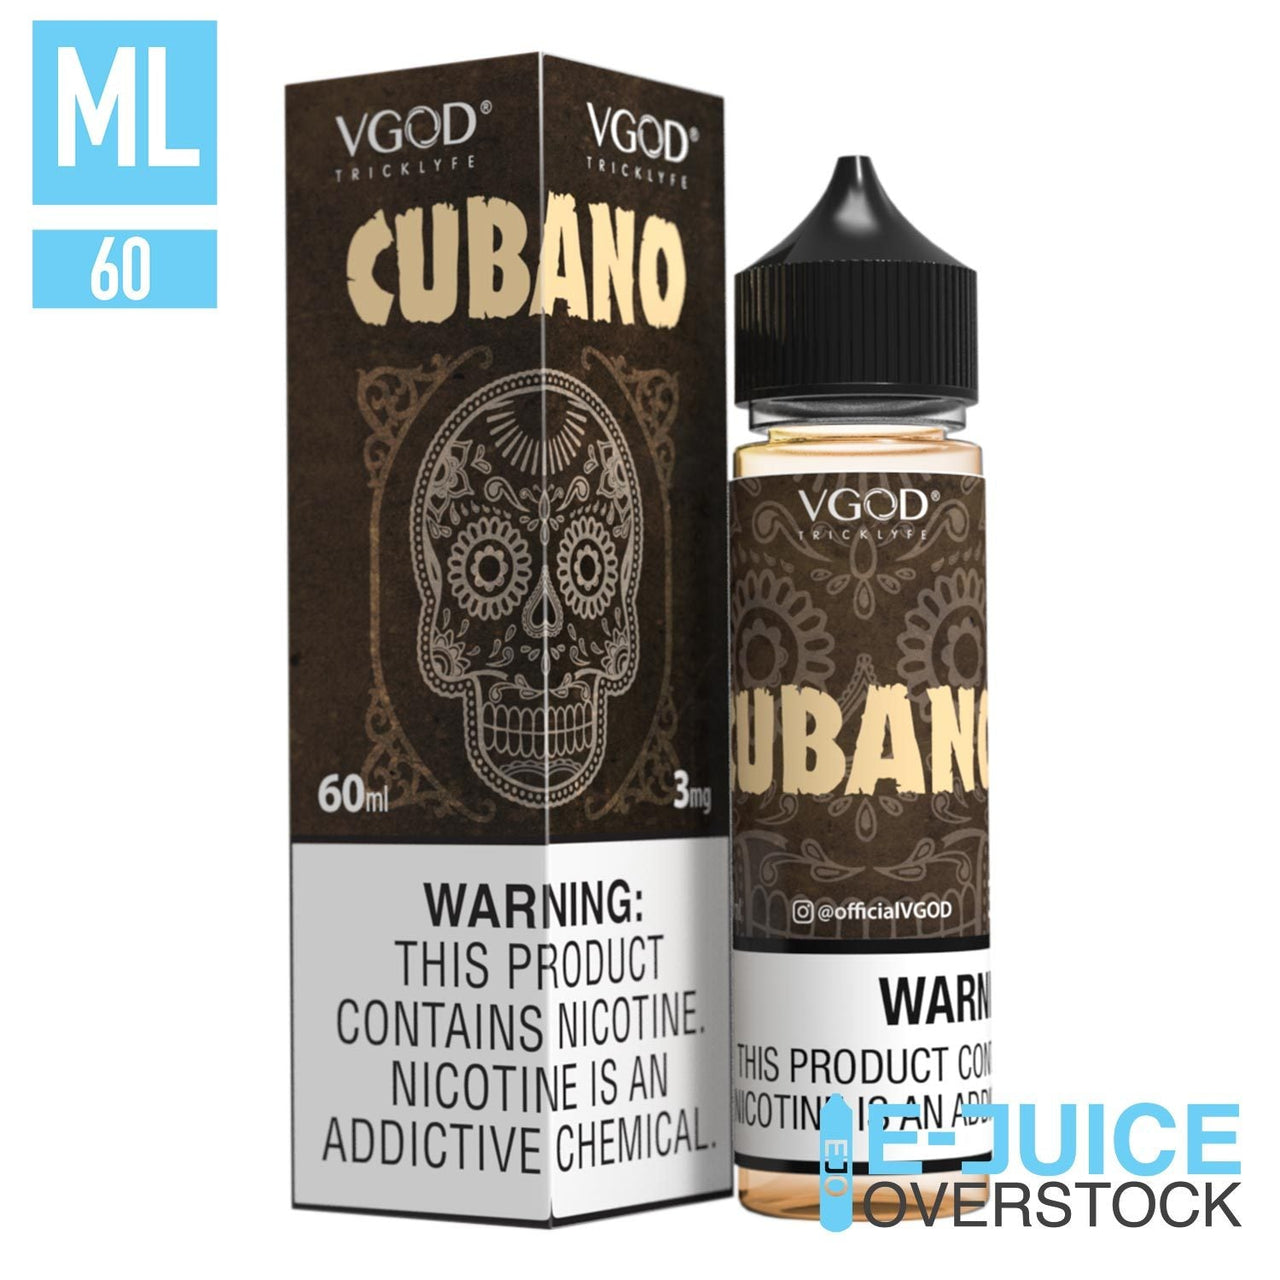 Cubano by VGOD 60ML - EJUICEOVERSTOCK.COM